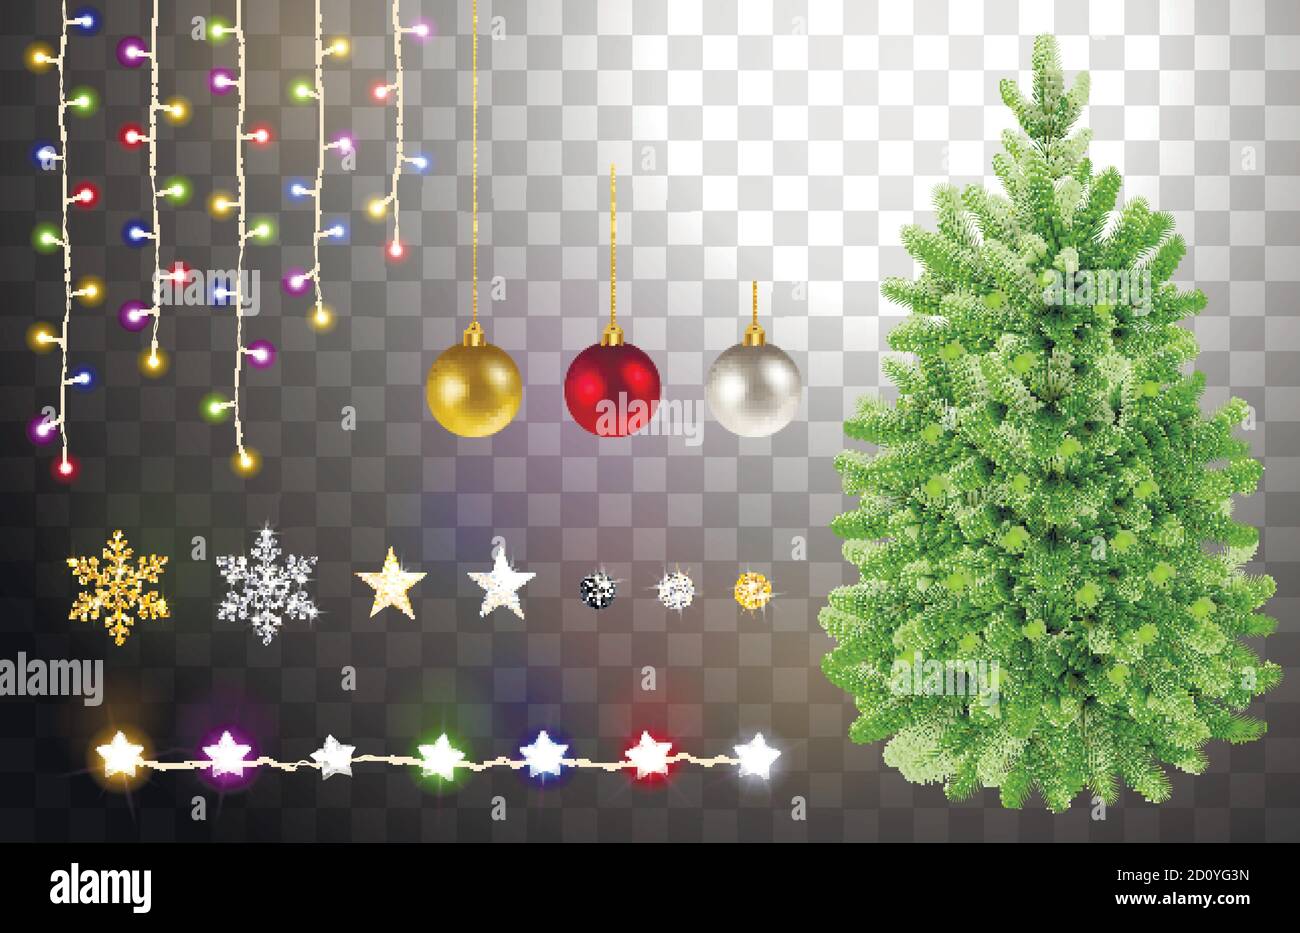 Christmas tree and decorative elements for holiday decoration Stock Vector